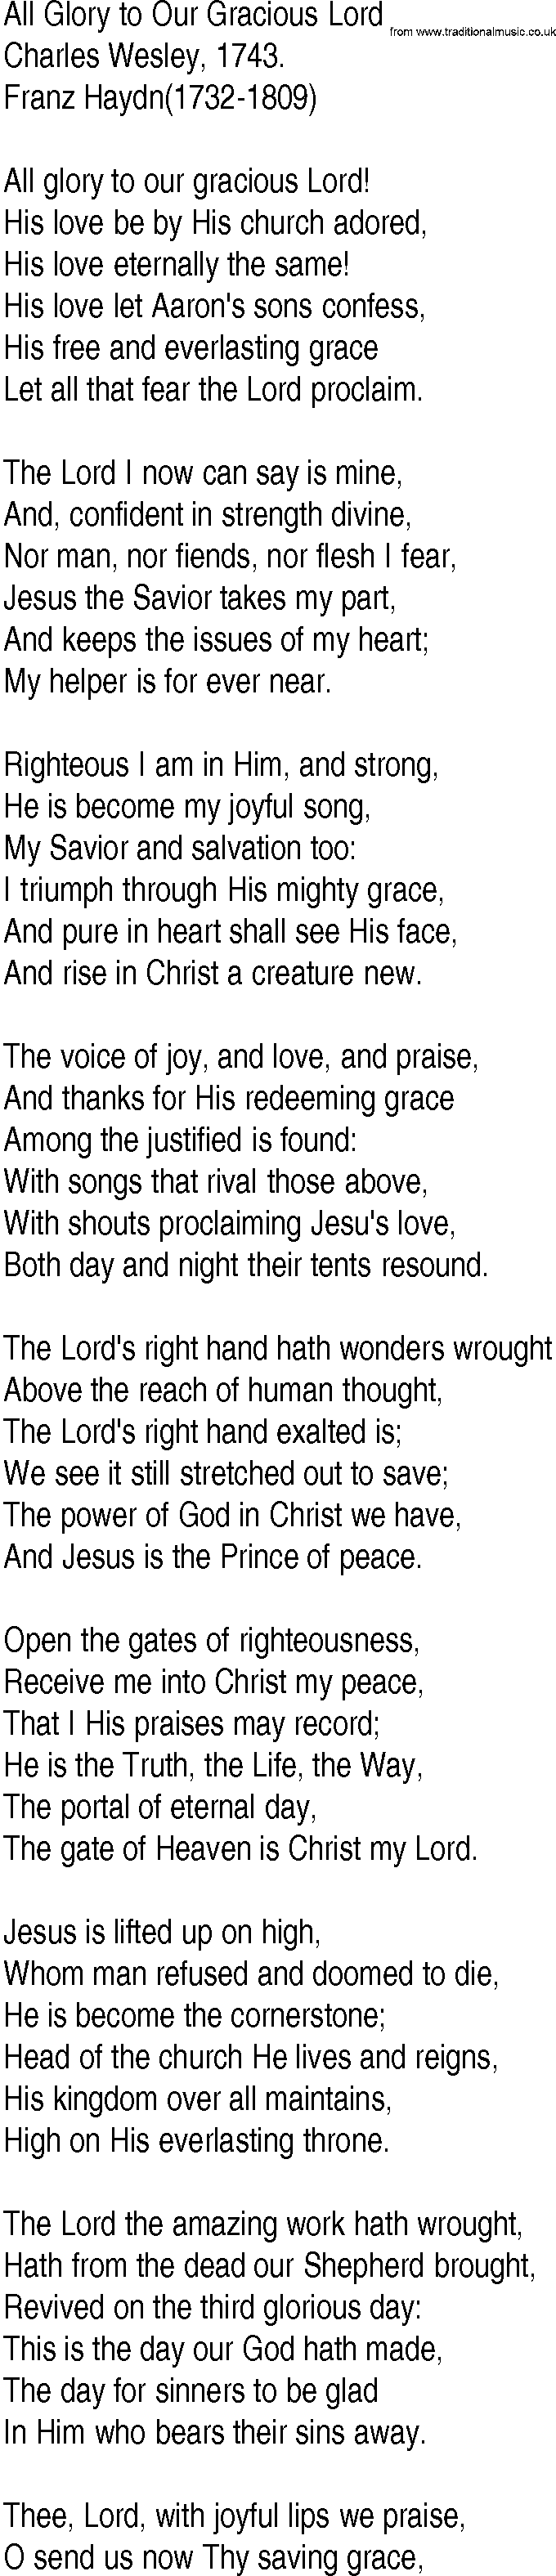 Hymn and Gospel Song: All Glory to Our Gracious Lord by Charles Wesley lyrics